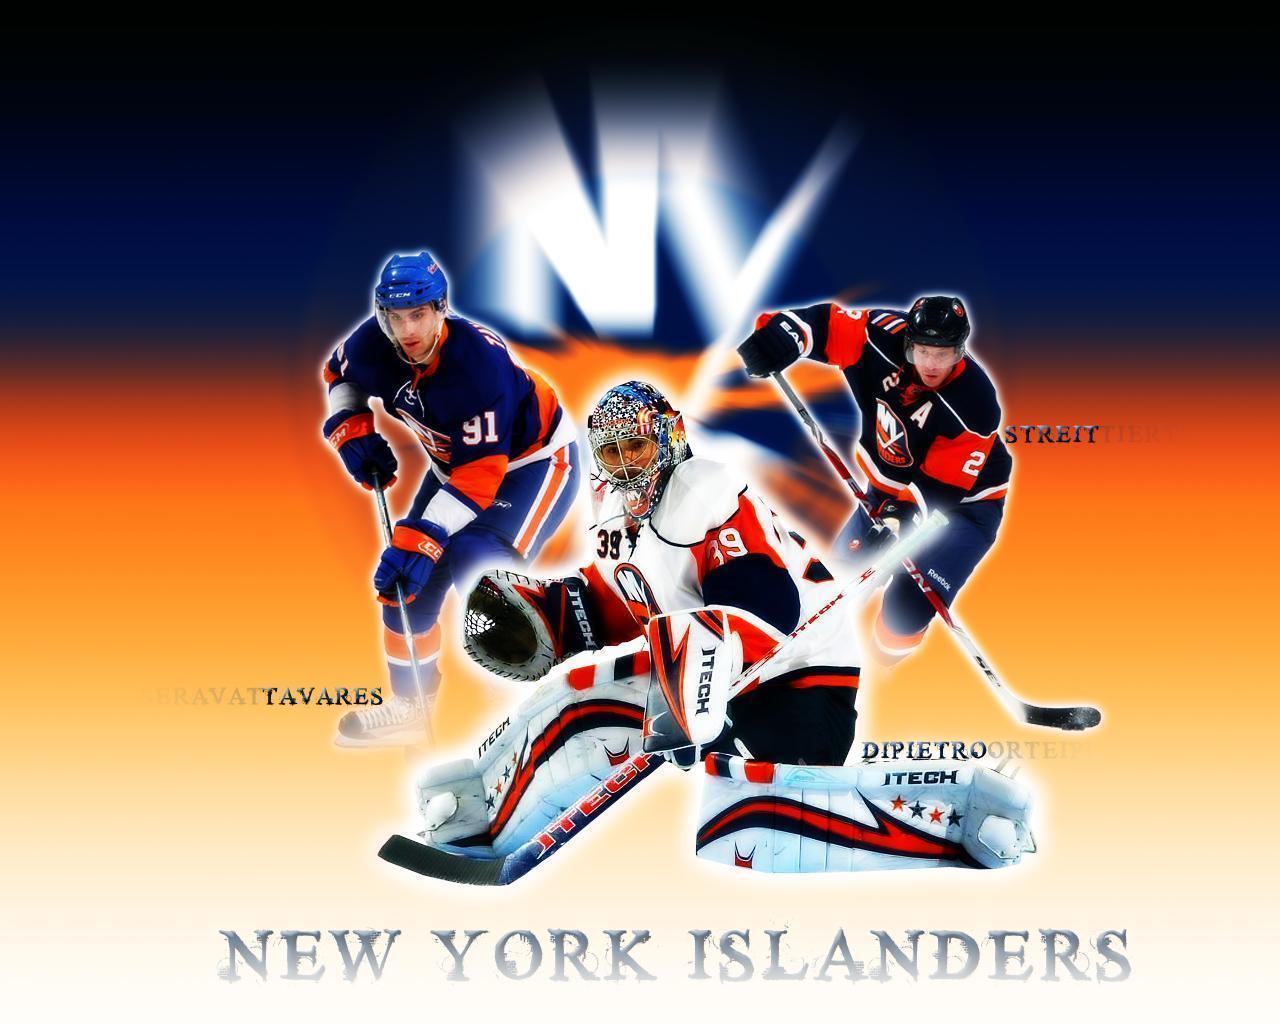 Download wallpapers New York Islanders hockey club NHL emblem logo  National Hockey League hockey New York USA for desktop with resolution  2560x1600 High Quality HD pictures wallpapers